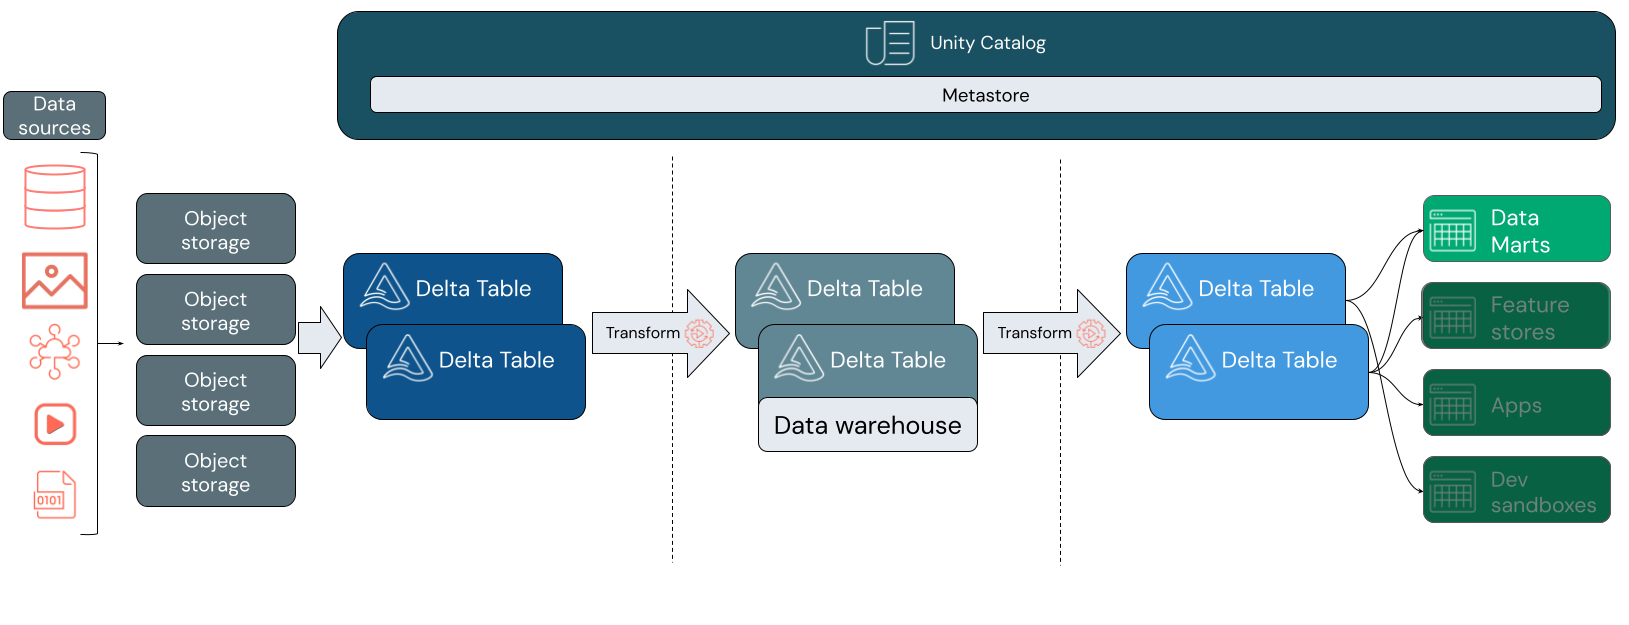 Lakehouse architecture with a top layer that includes data warehousing, data engineering, data streaming, and data science and ML